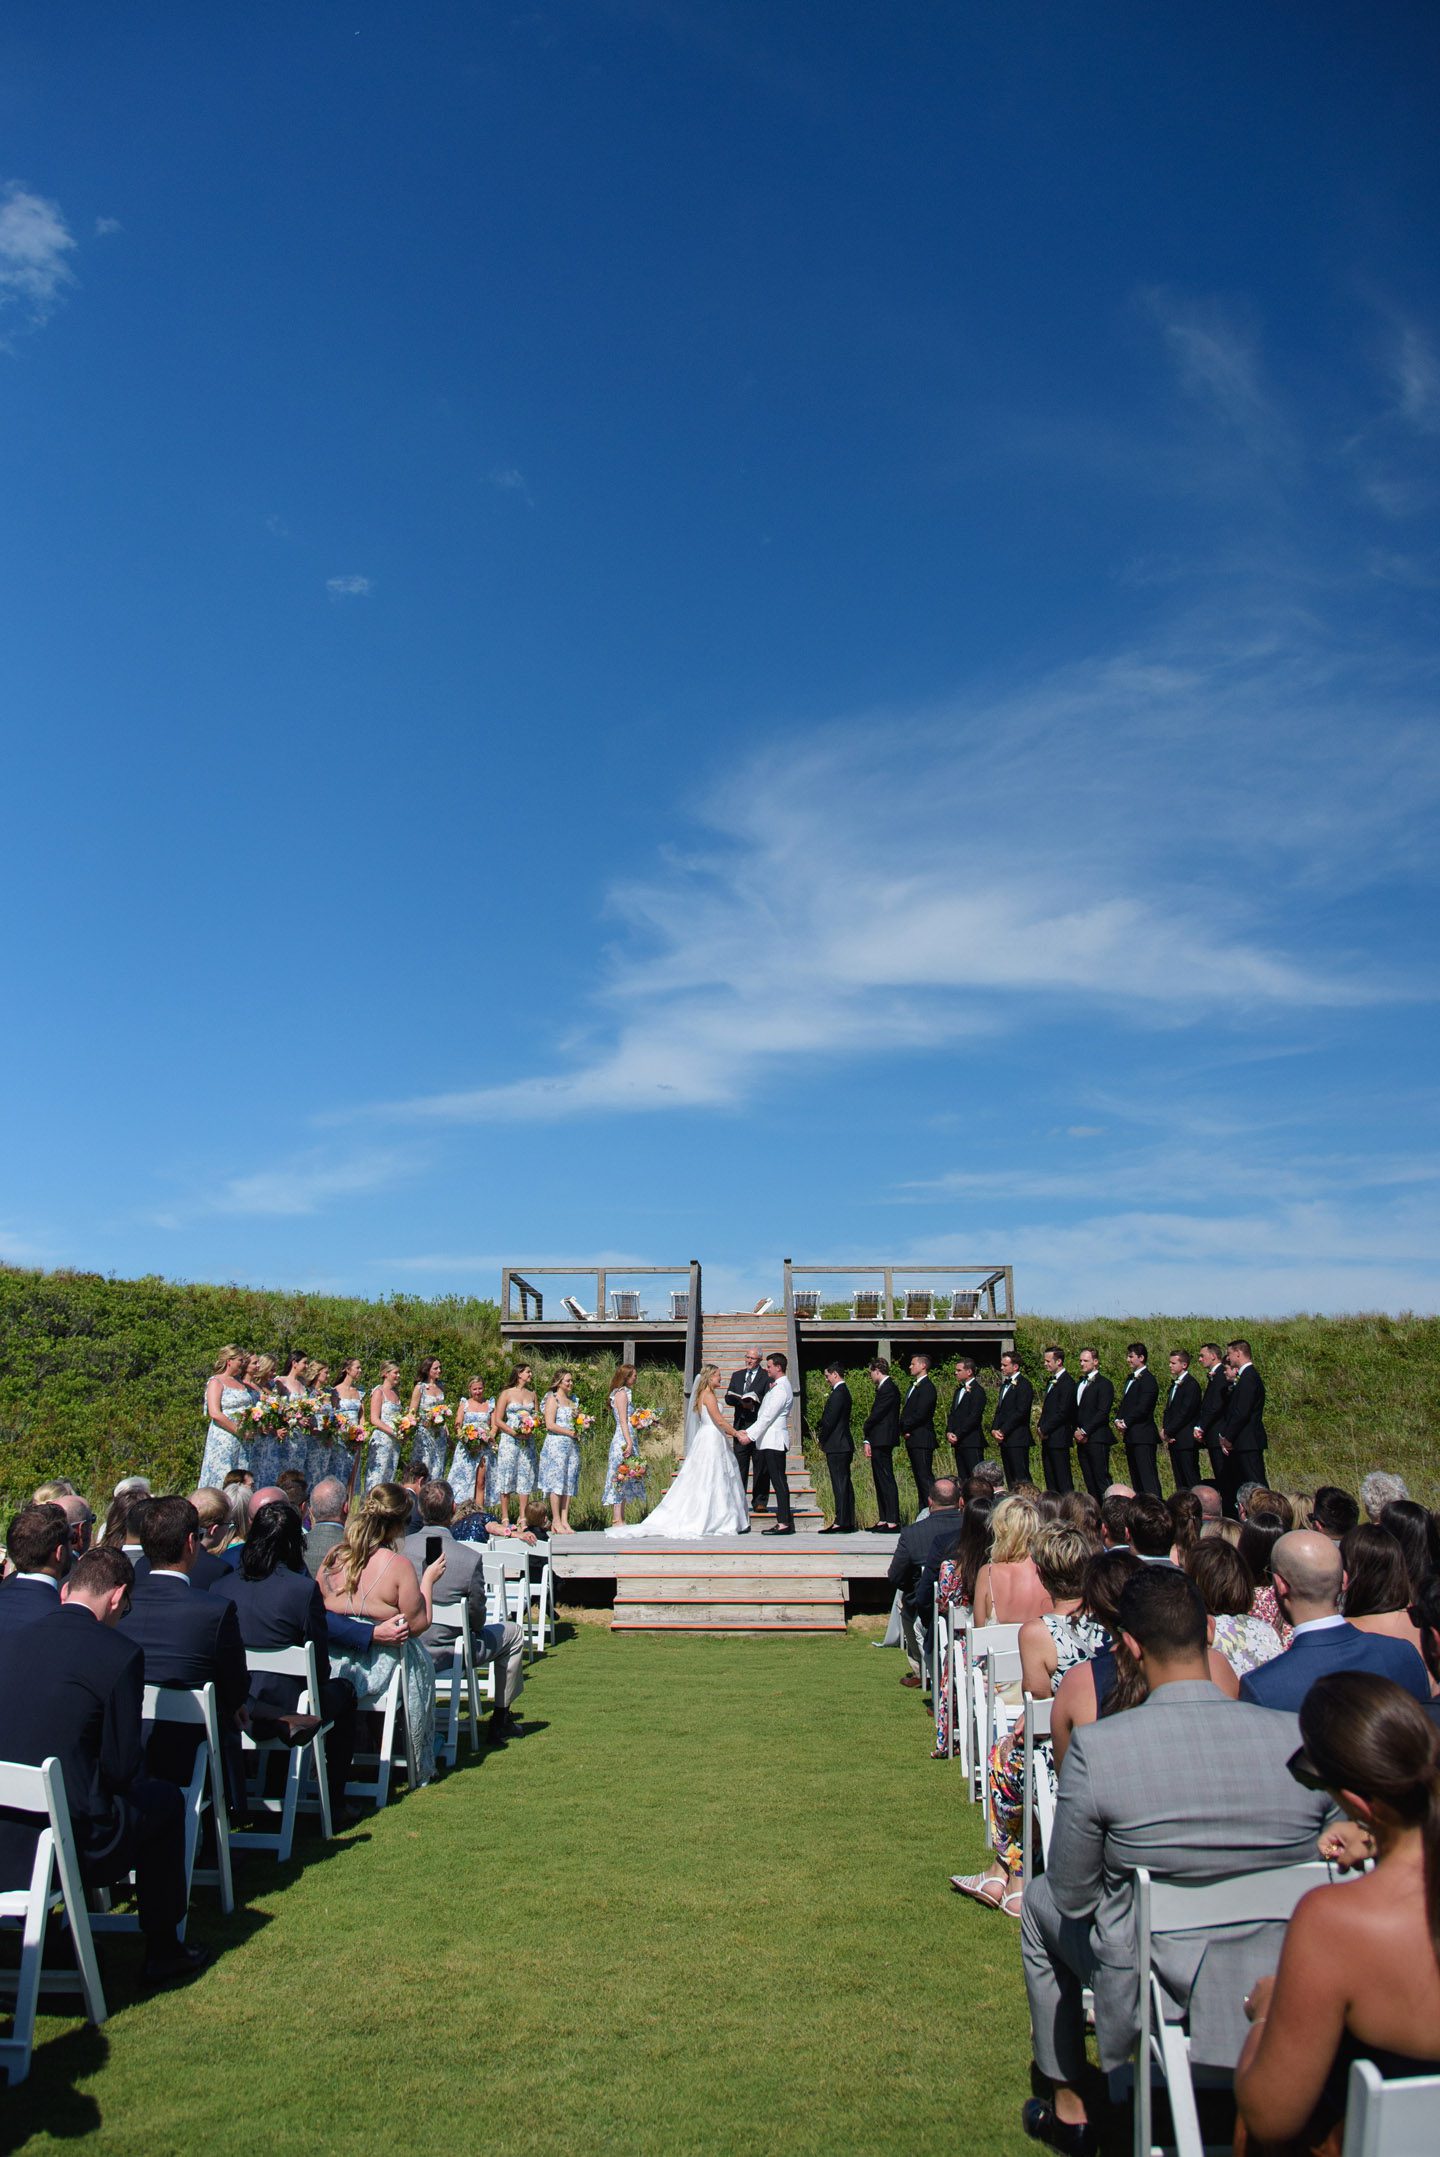 Wedding ceremony on the event lawn at the Sanderling Resort